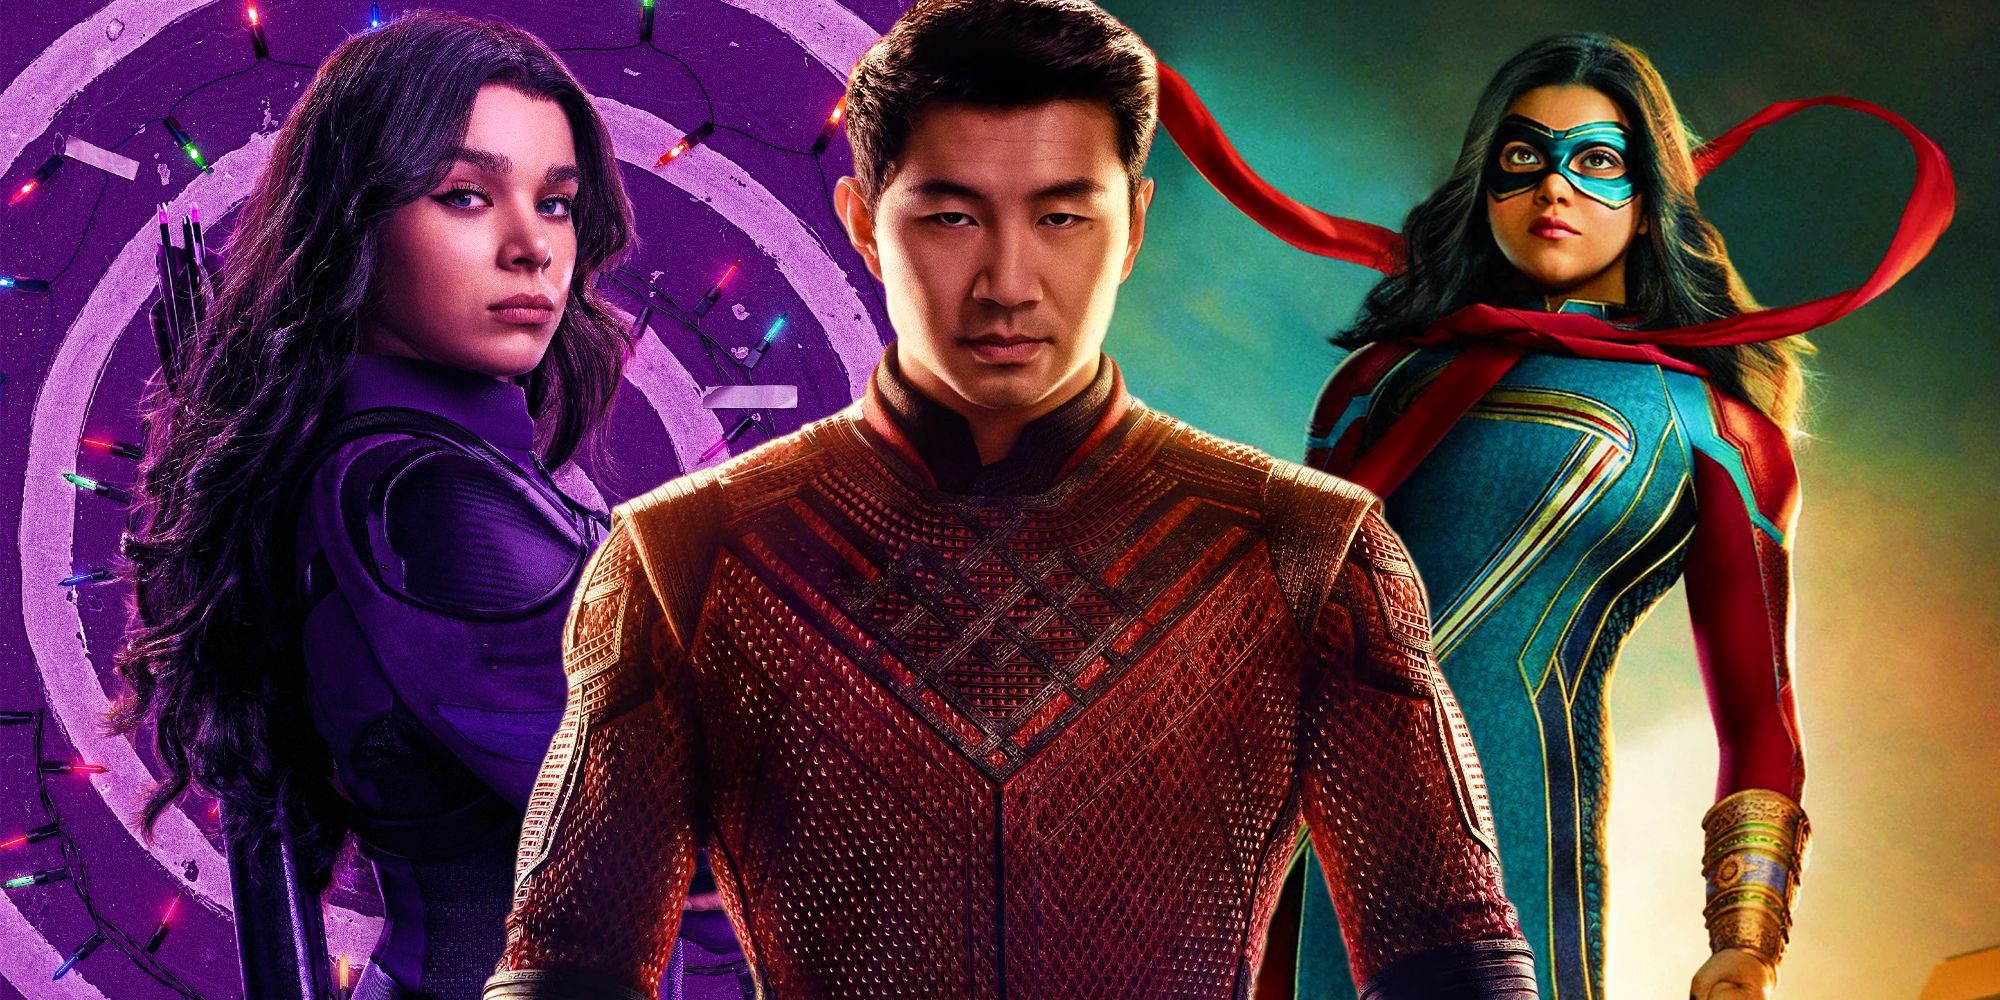 Hailee Steinfeld as Kate Bishop and Iman Vellani as Ms. Marvel either side of Simu Liu as Shang-Chi